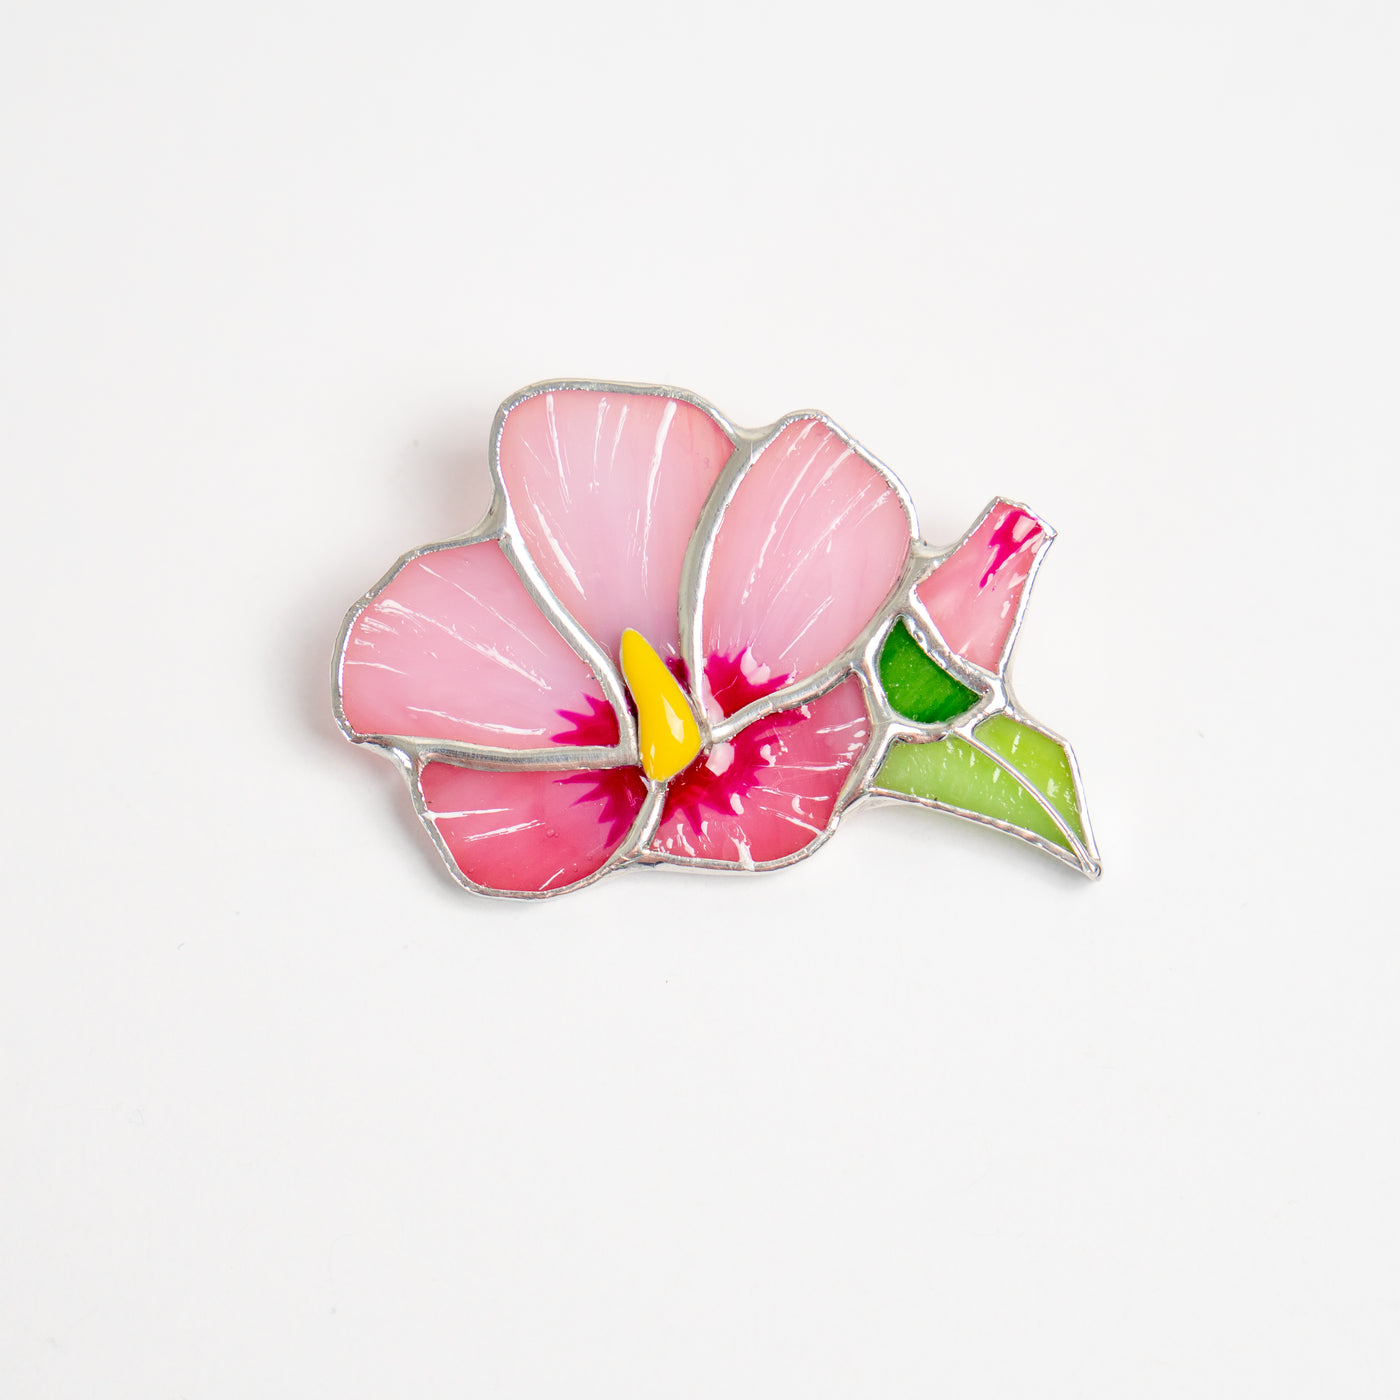 Stained glass pink mallow flower with yellow in the middle brooch